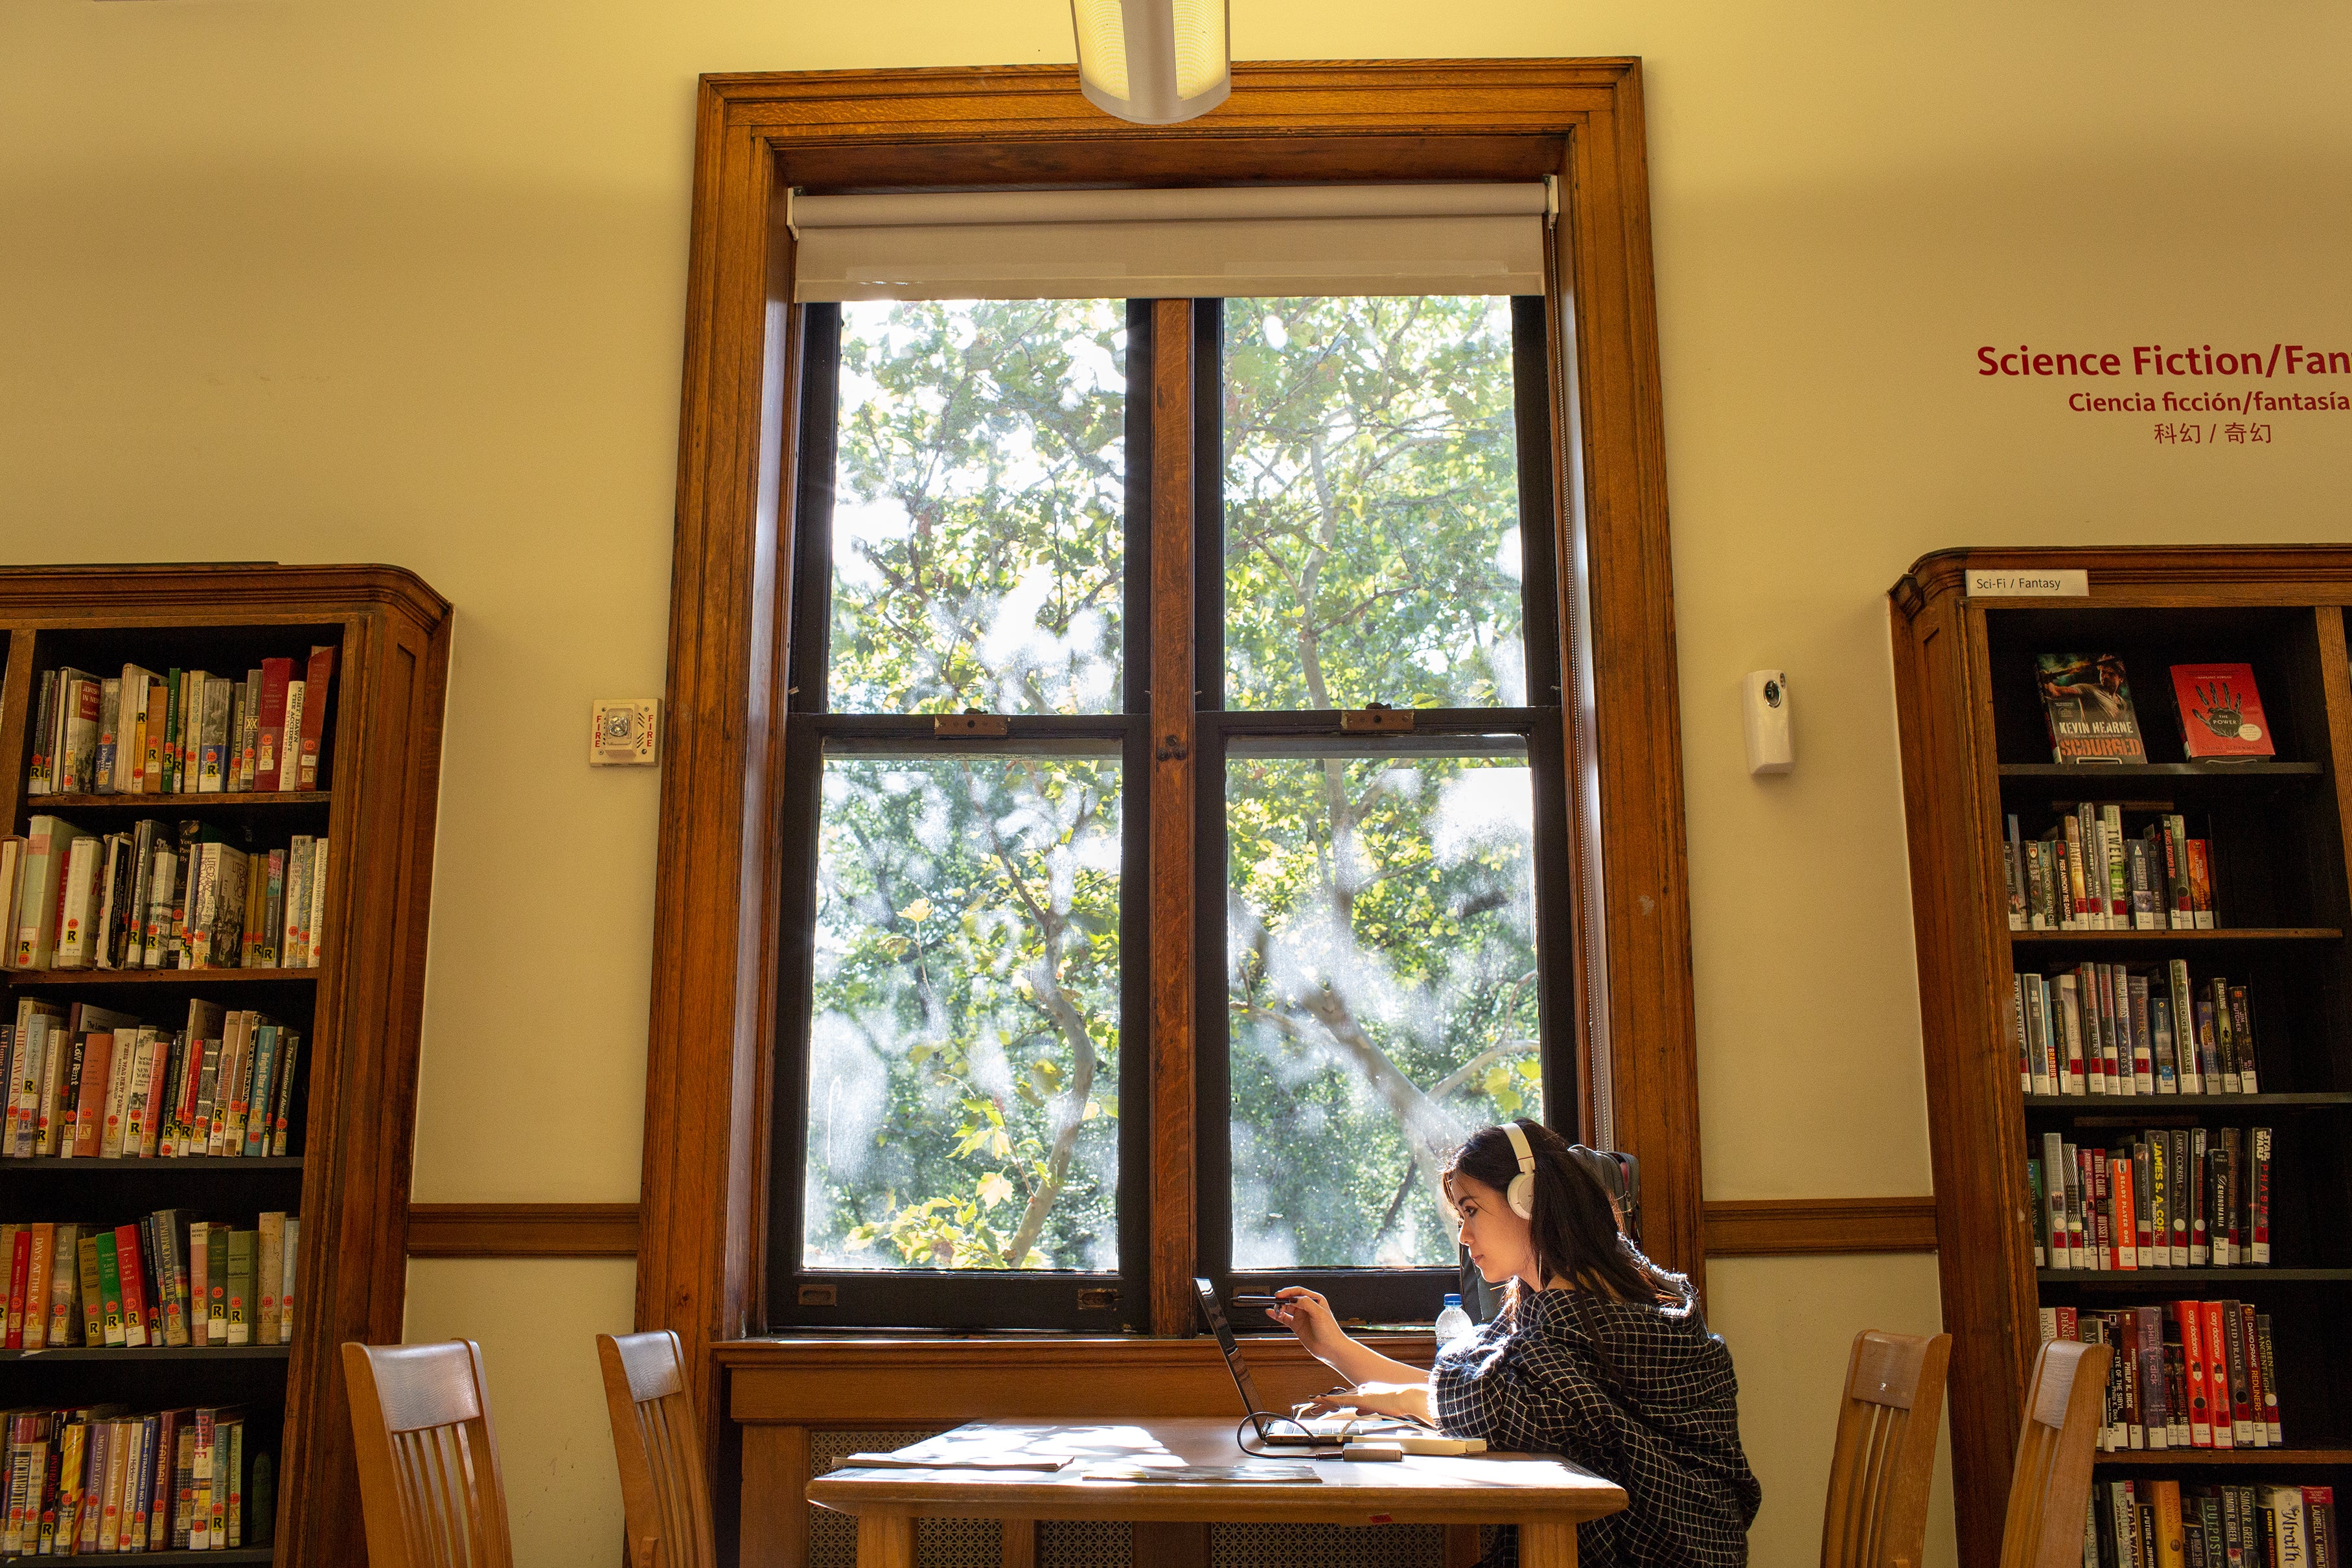 A young woman uses her laptop at a table by the window, sunlight streaming in.